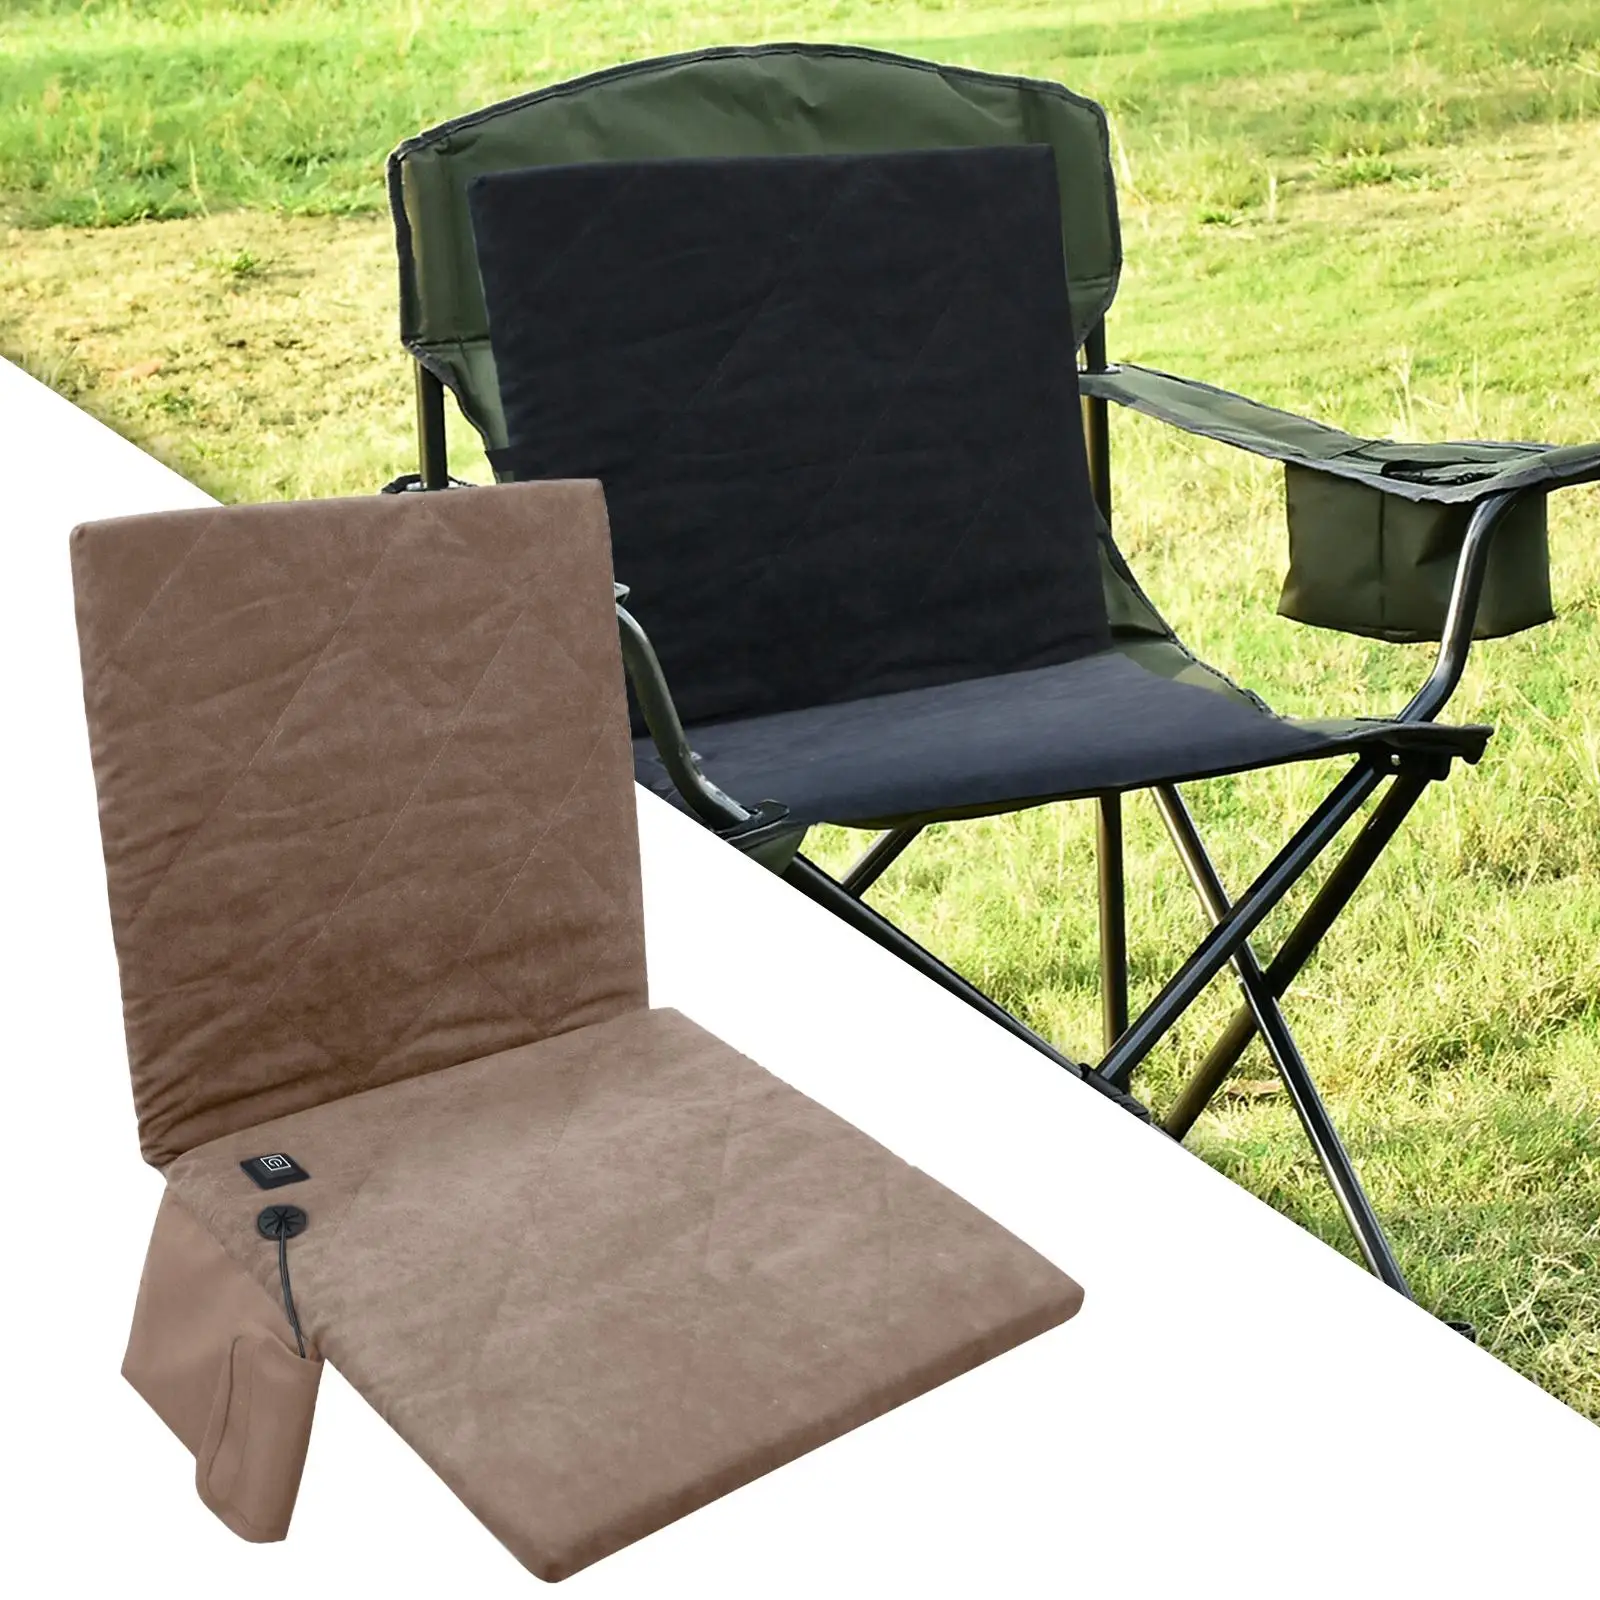 Heated Camping Chair Heated Cushion Adjustable Temperature Comfort for BBQ